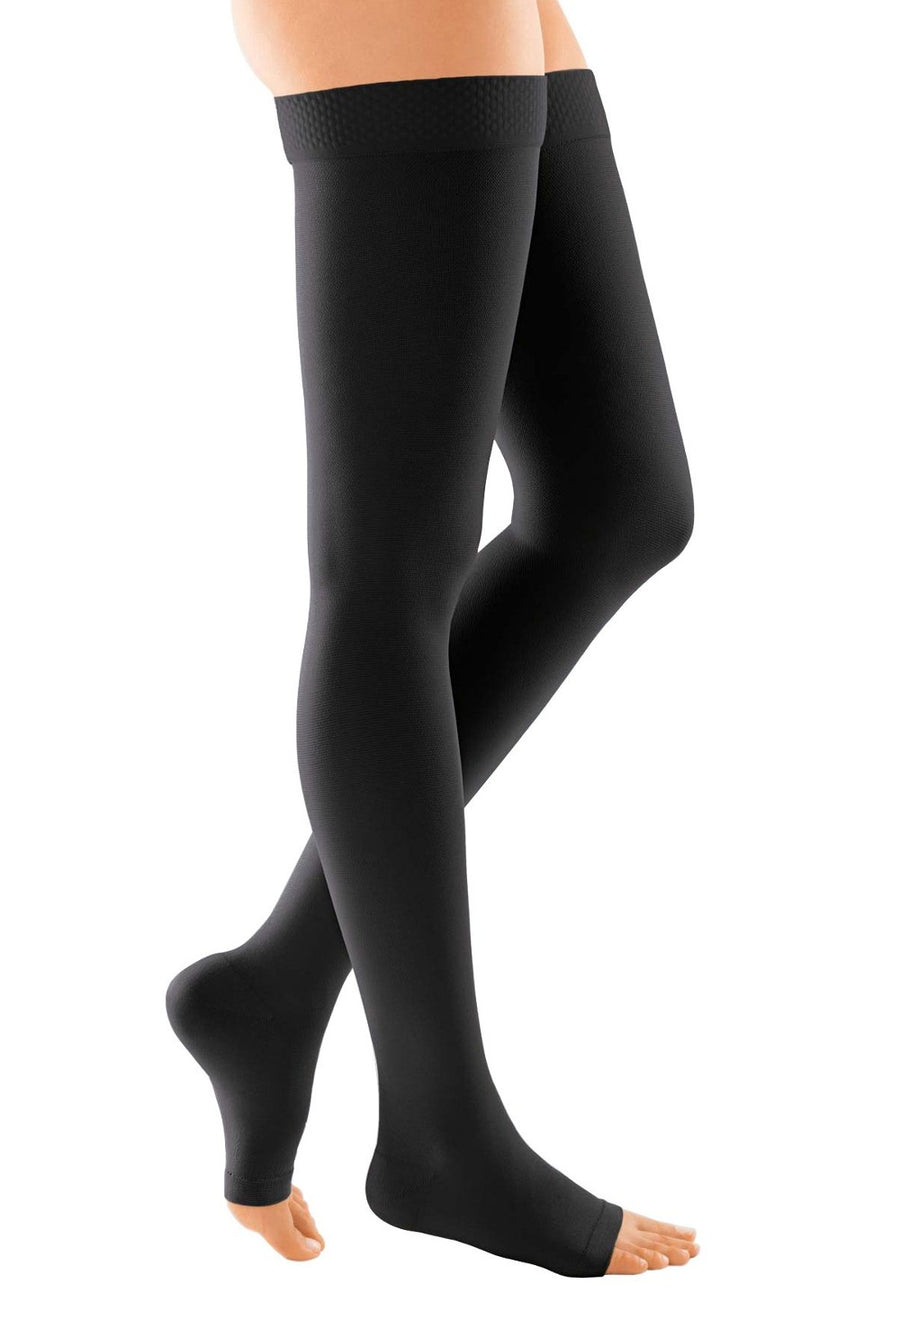 medi duomed thigh high black compression stockings